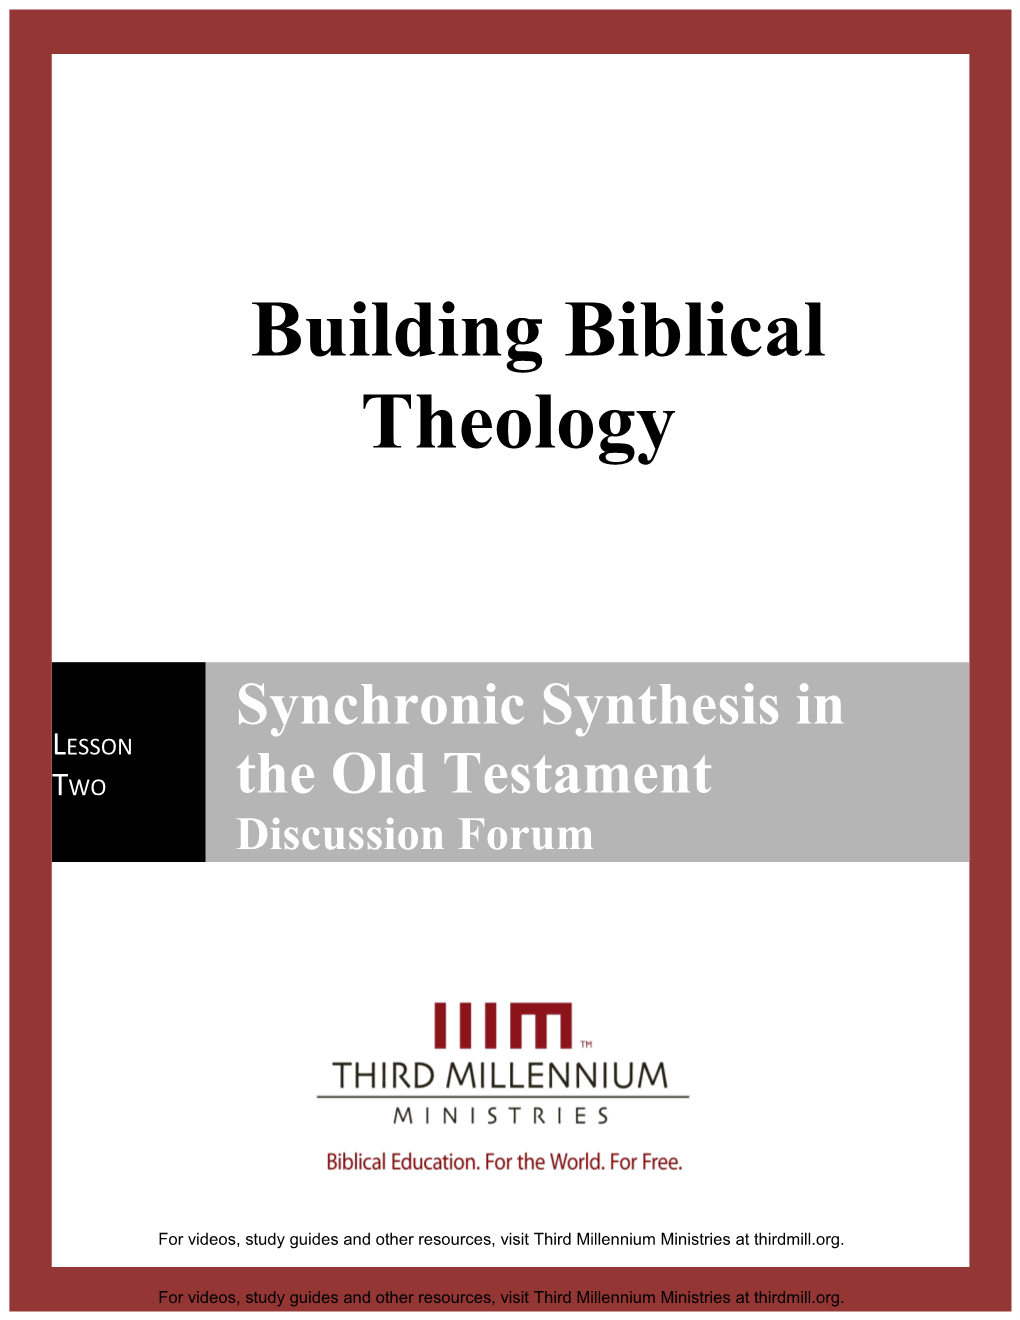 Building Biblical Theology Lesson 2